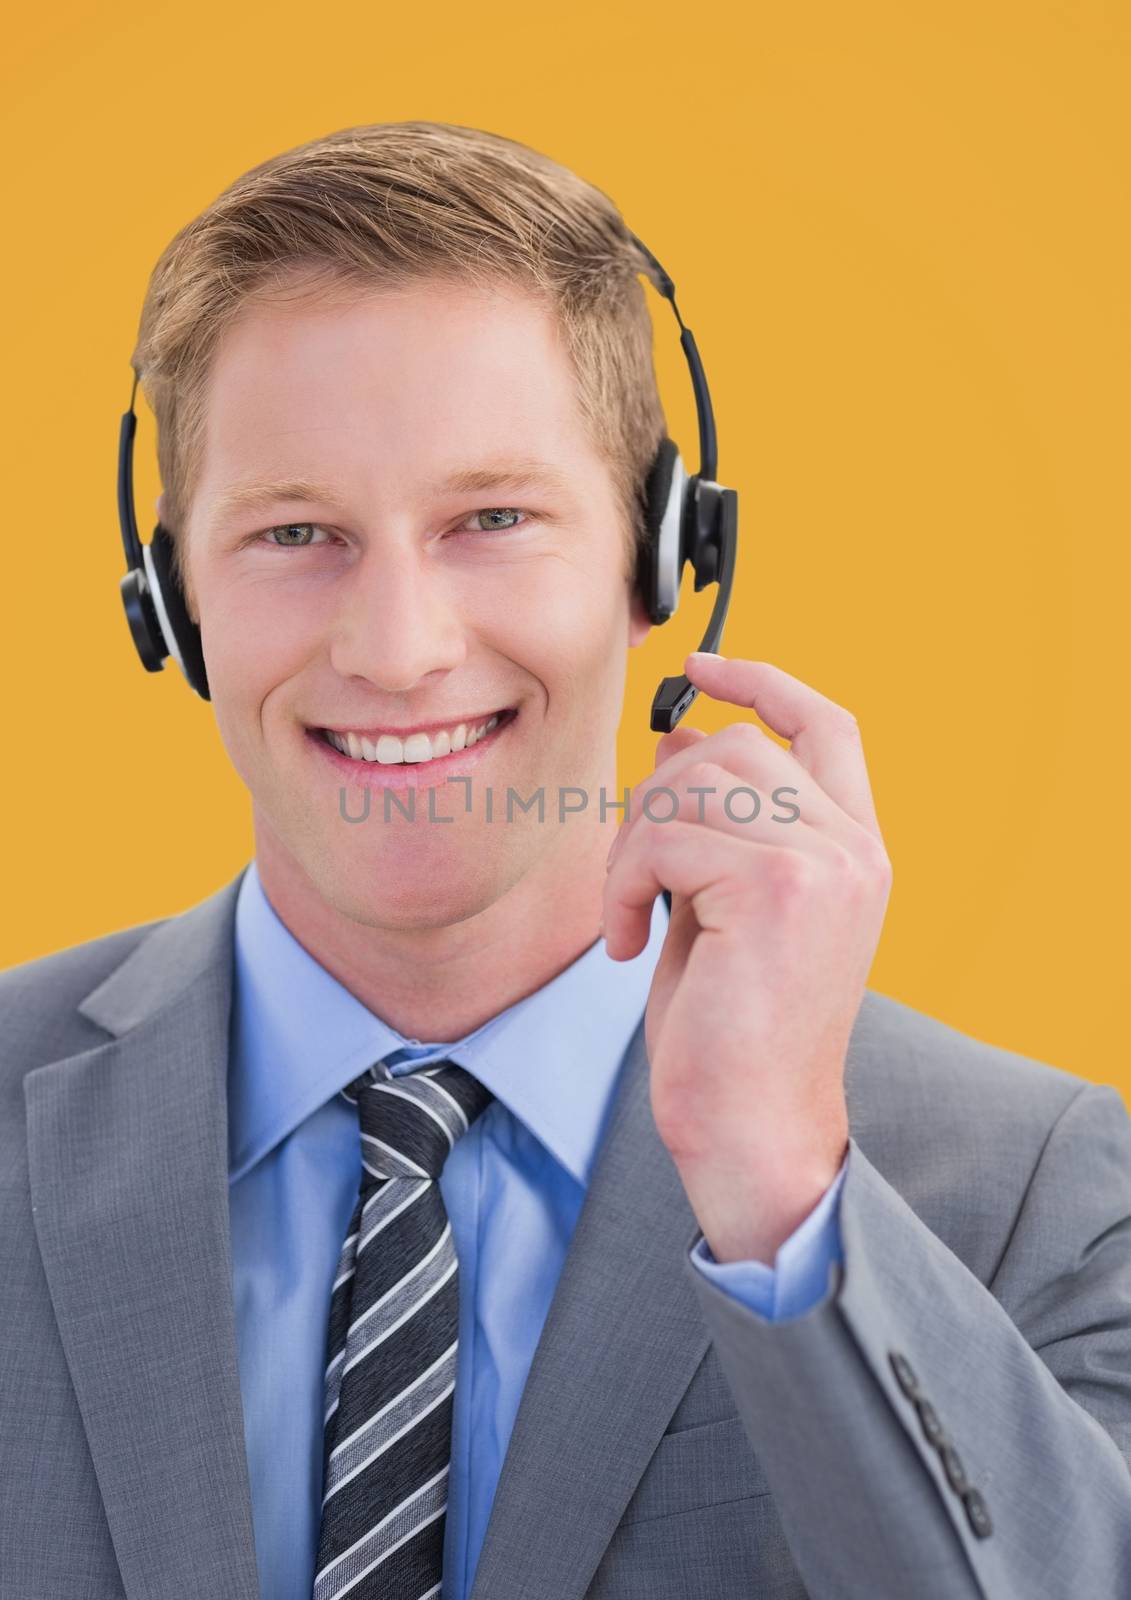 Travel agent using headset and smiling against a yellow background by Wavebreakmedia